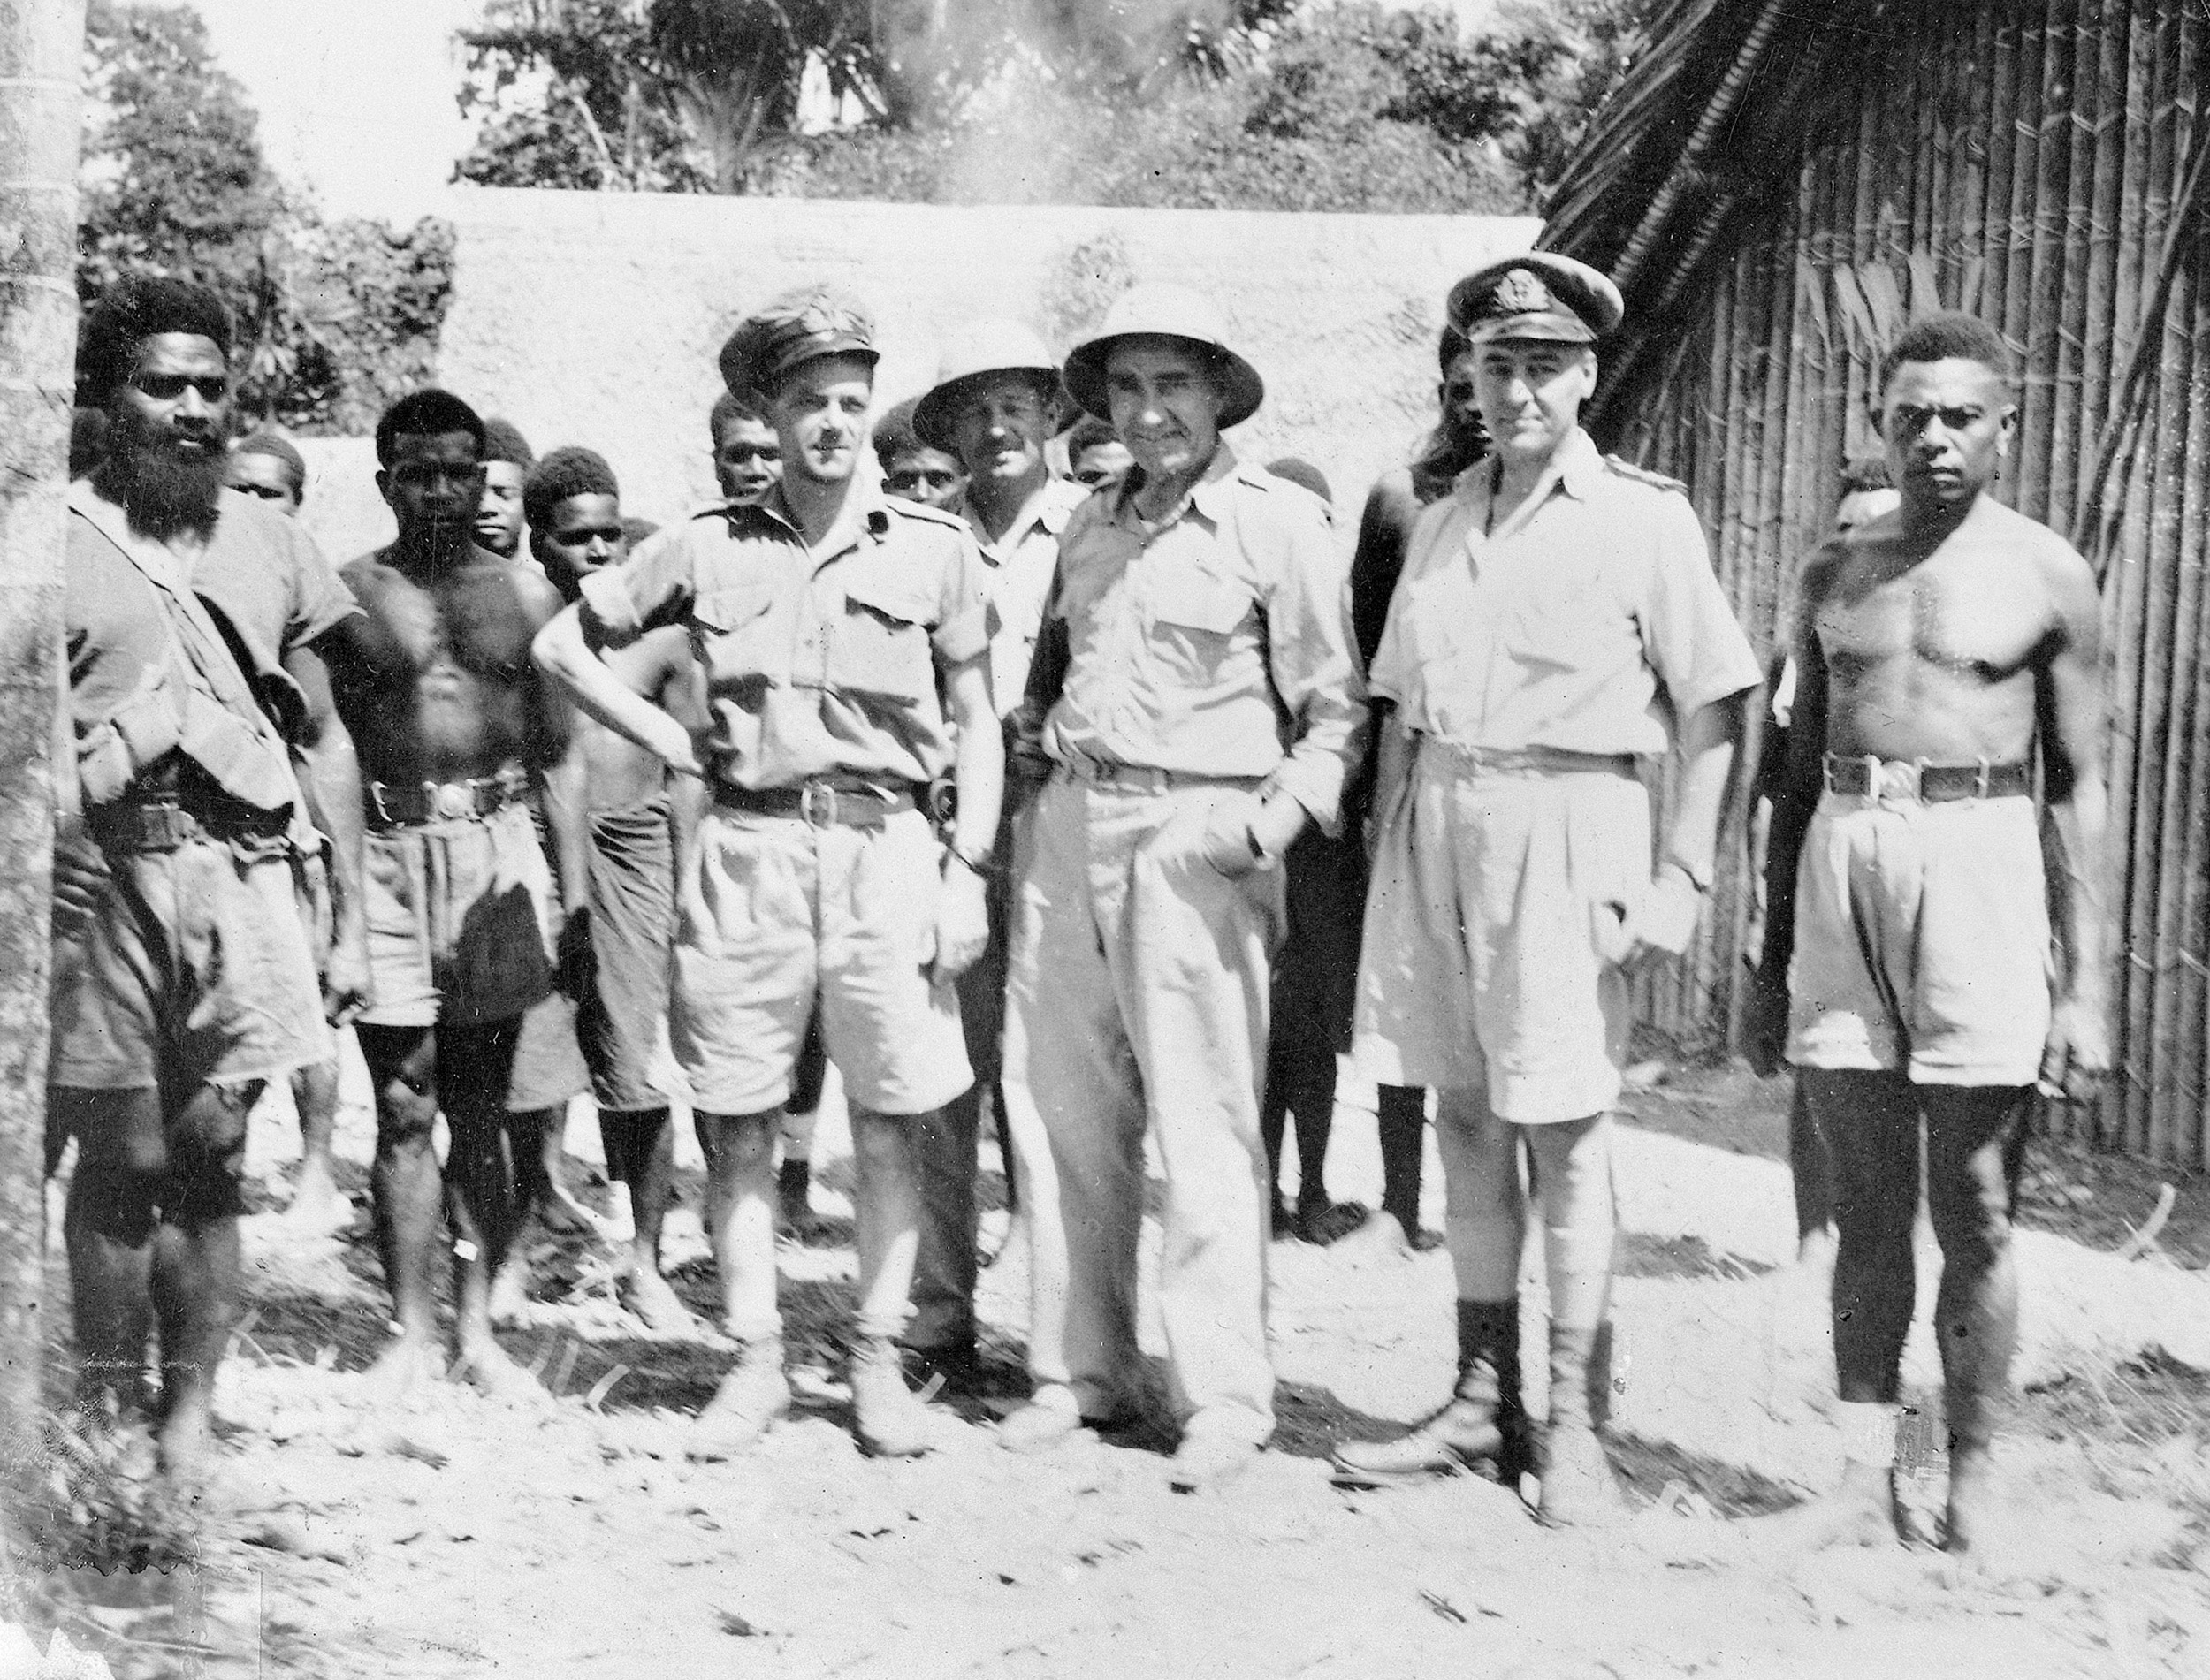 Lt. Cmdr. W.J. “Jack” Read of the Royal Australian Navy Intelligence Division poses (hand on hip) with other personnel, including native scouts, at the Australian Intelligence Bureau Camp at Lunga, Guadalcanal, on March 27, 1945. 